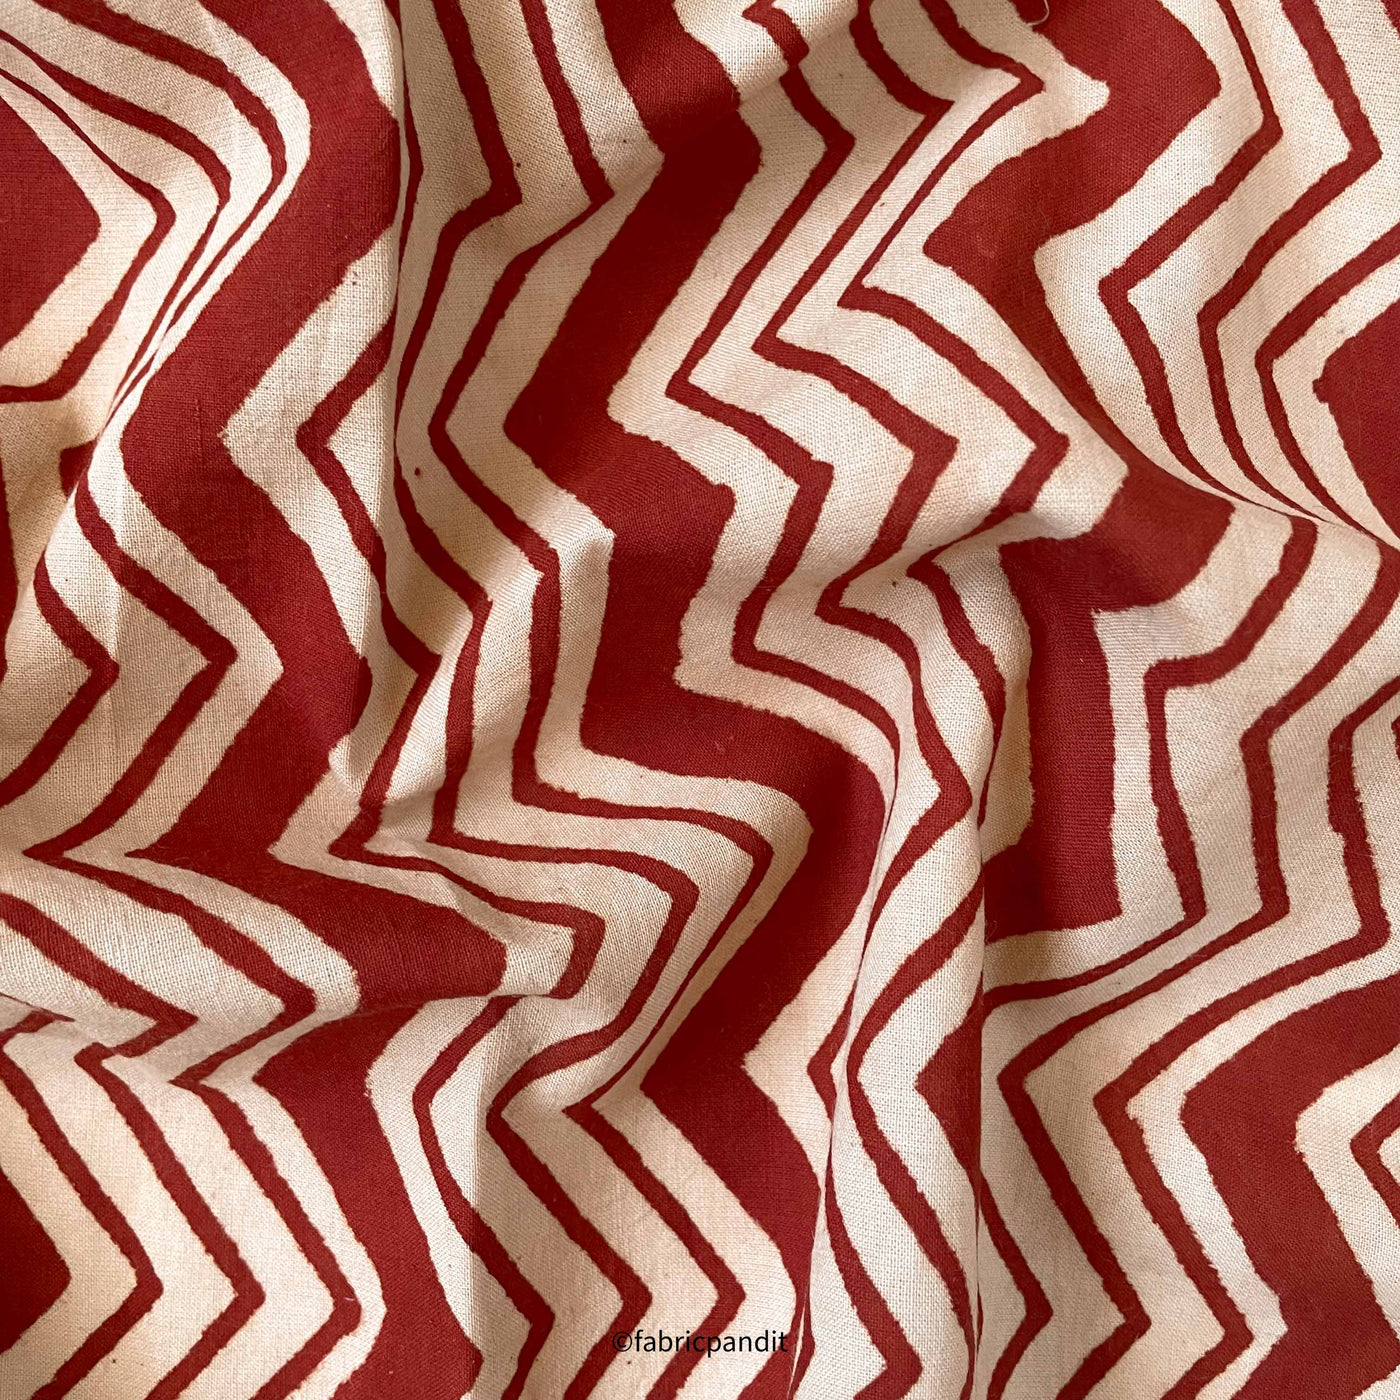 Fabric Pandit Fabric Dusty Red & Beige Zig-Zag Authentic Bagru Hand Block Printed Pure Cotton Fabric (Width 42 inches)